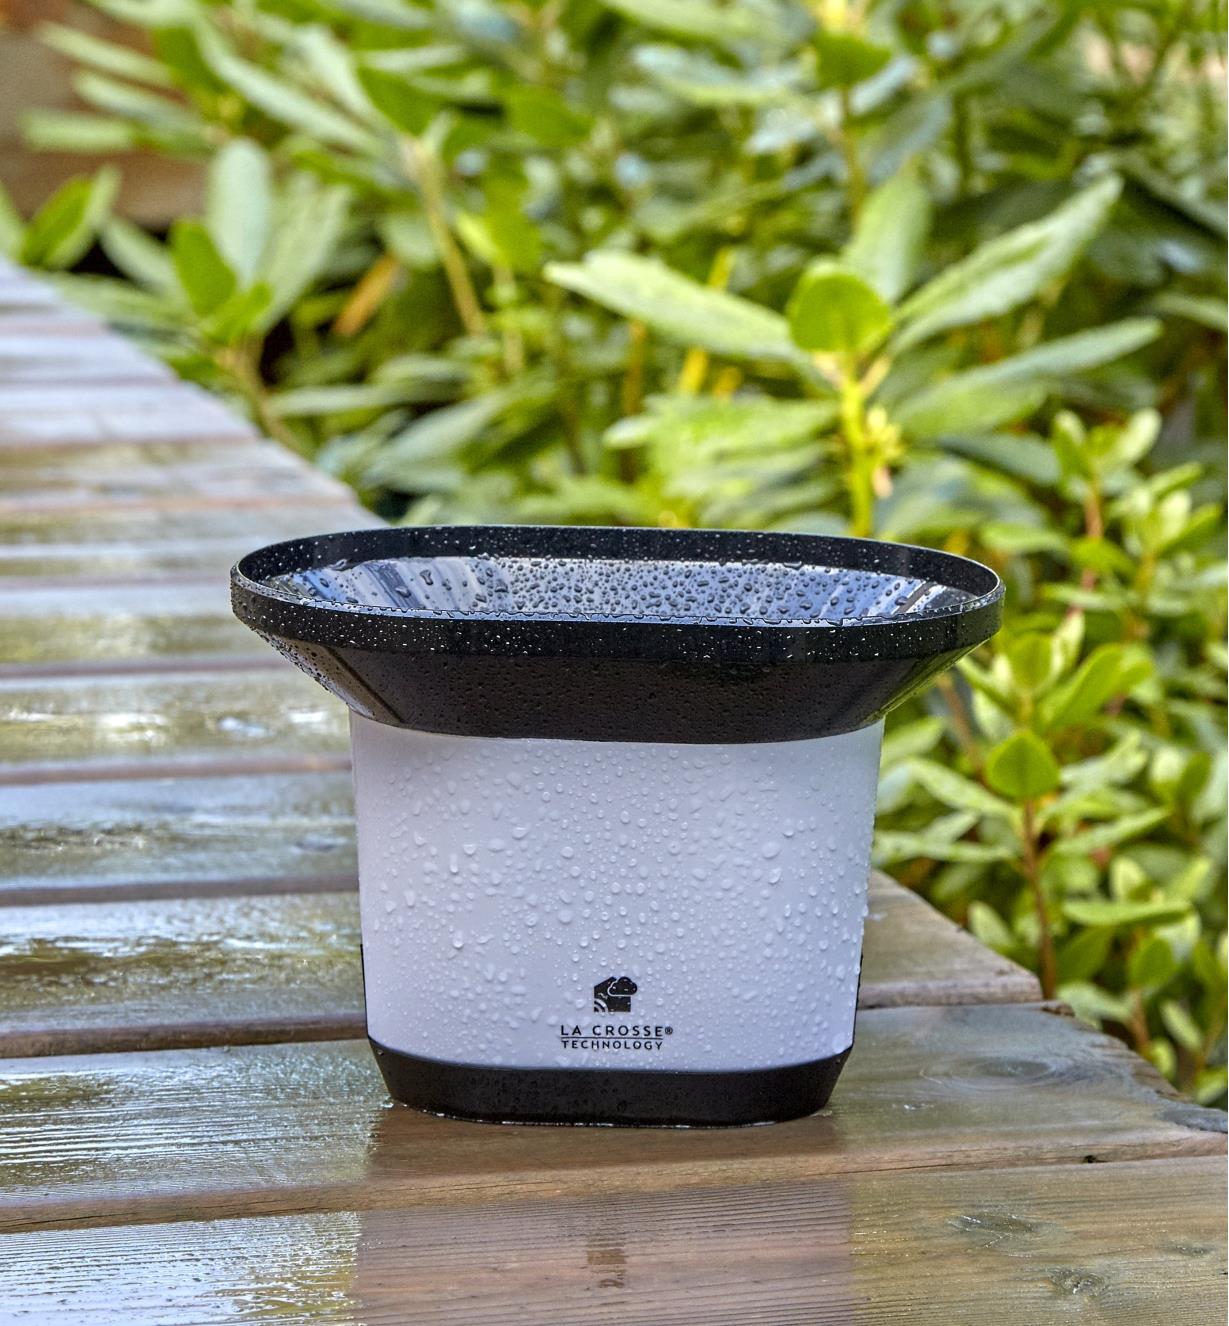 Rain sensor of the Wi-Fi weather station with wind and rain collects rainfall in its funnel